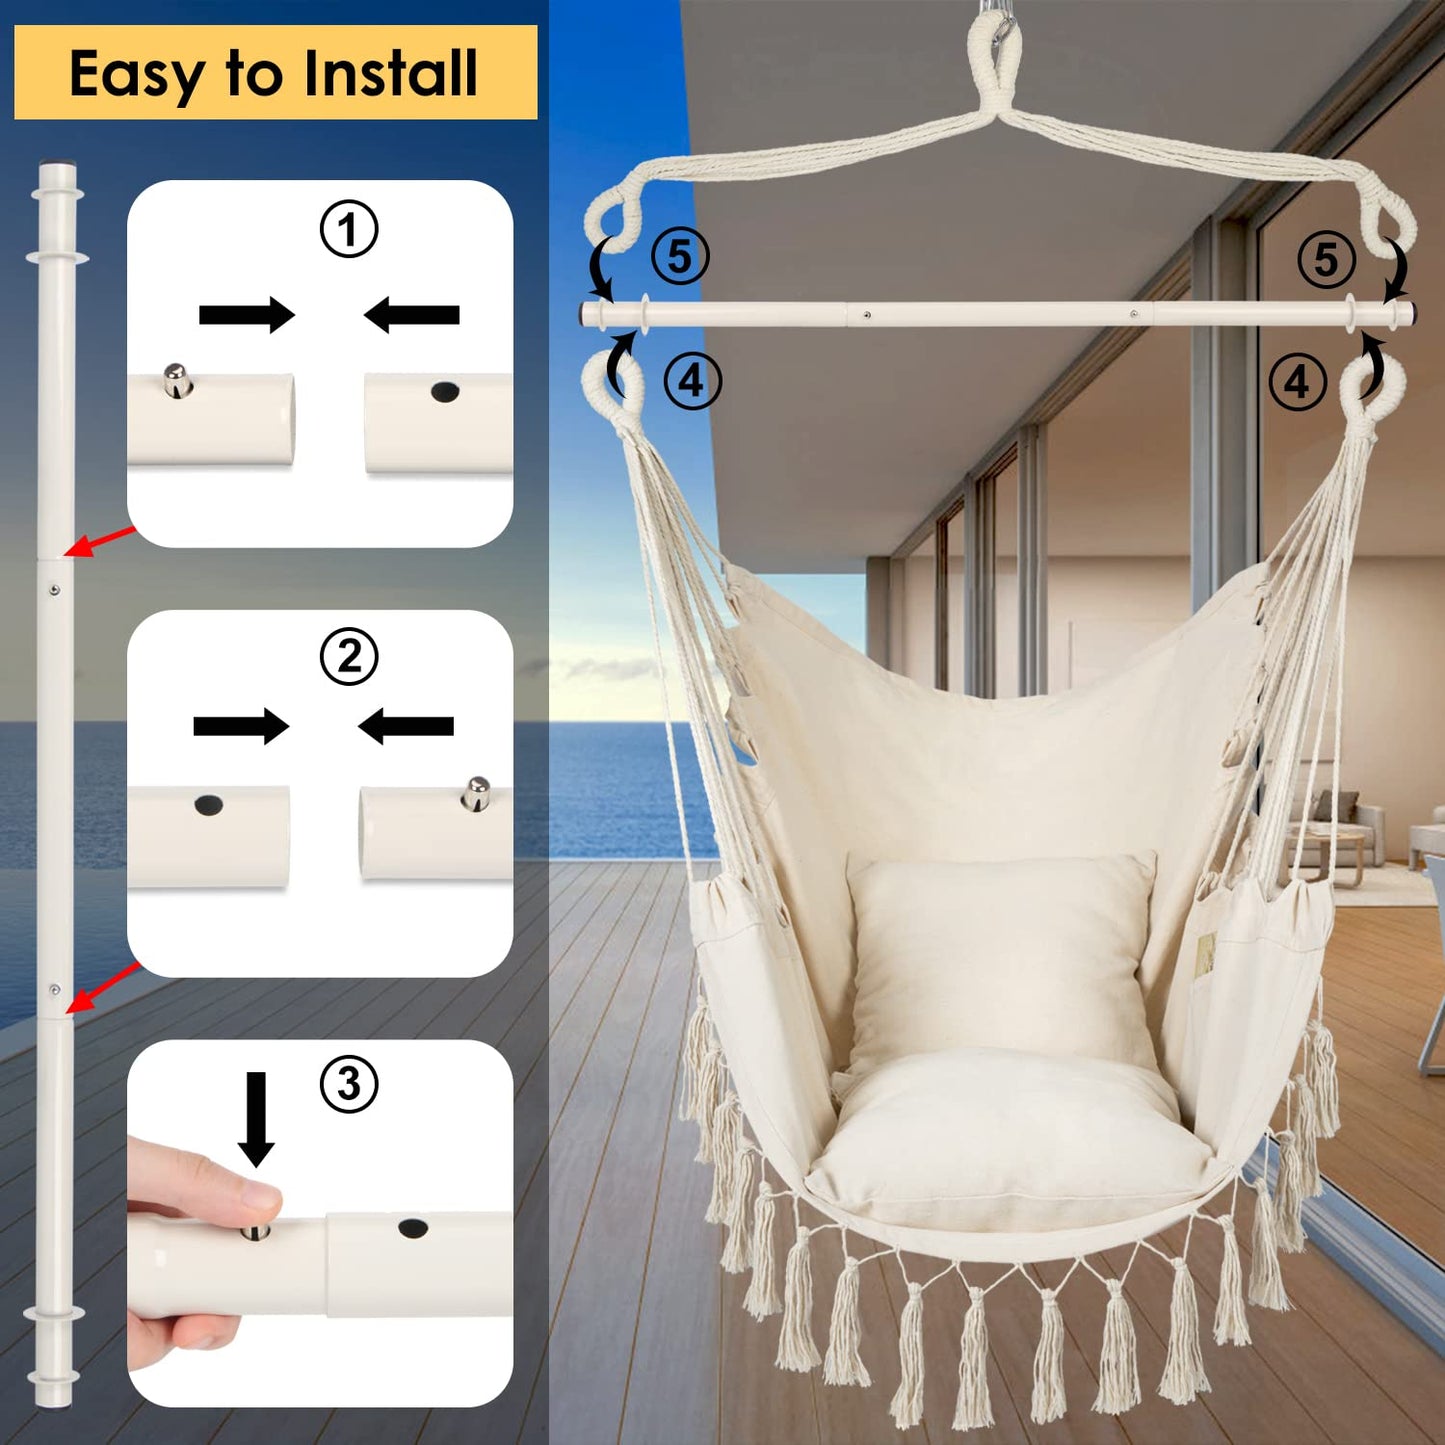 Y- STOP Hammock Chair Hanging Rope Swing, Max 500 Lbs, 2 Cushions Included, Large Macrame Hanging Chair with Pocket for Superior Comfort, with Hardware Kit (Beige)